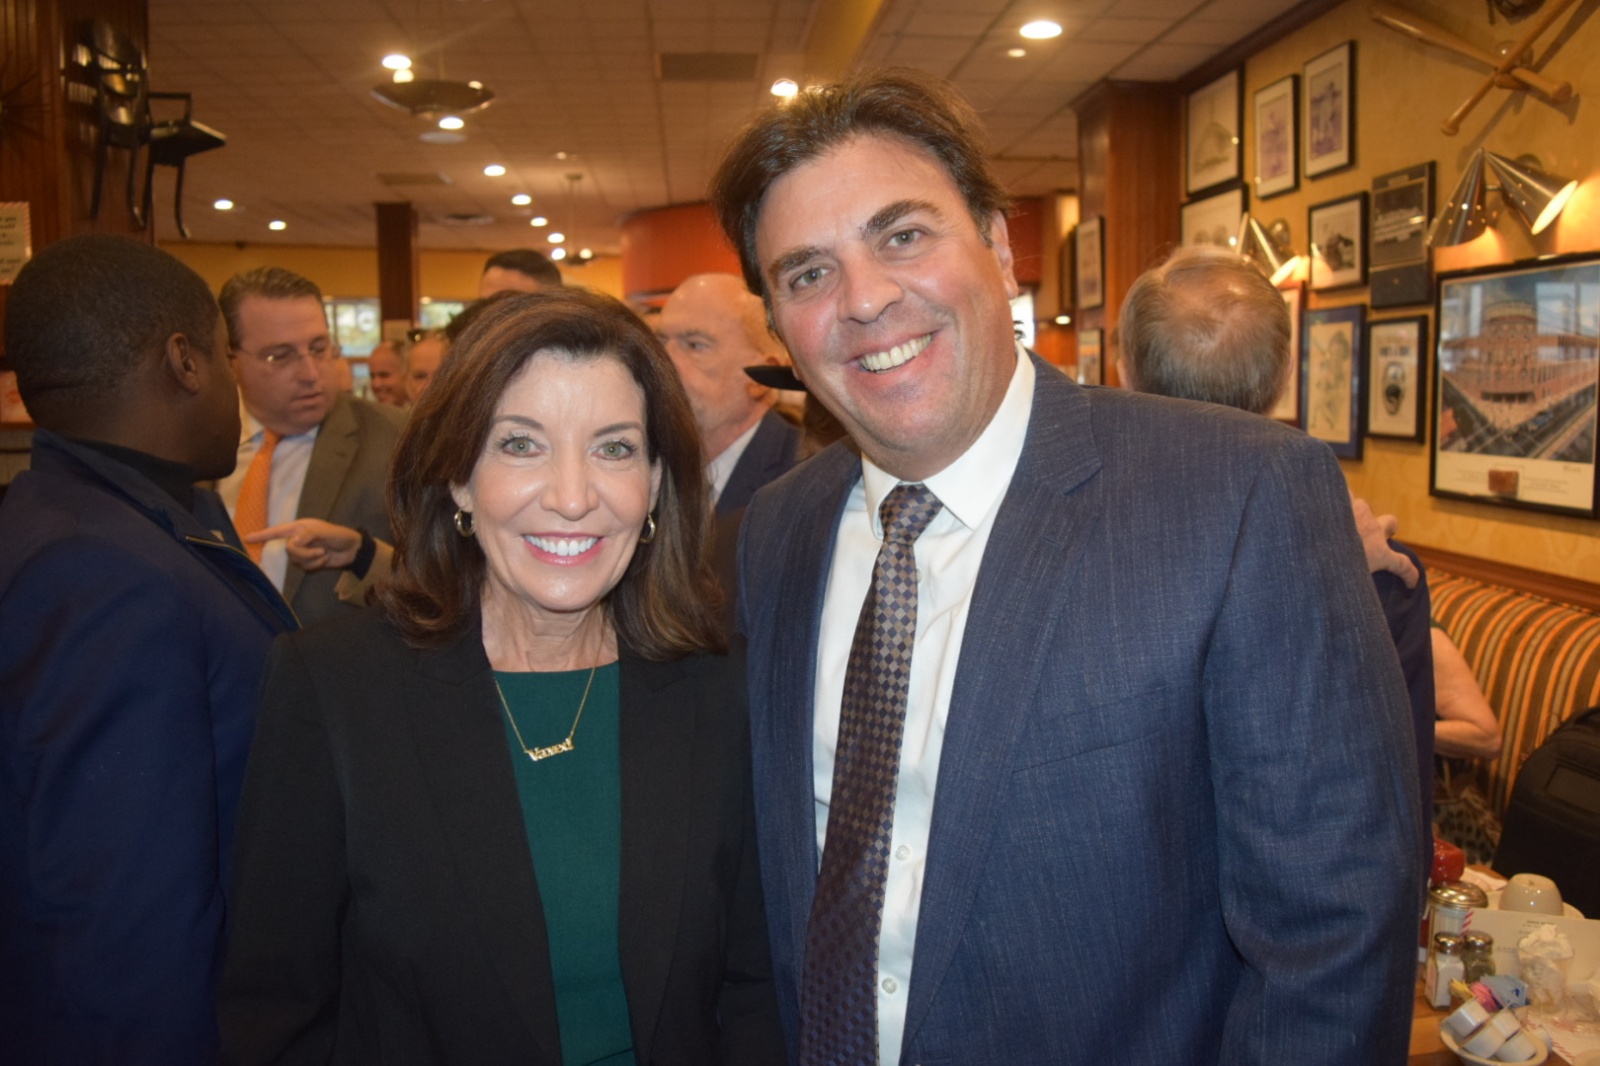 NY Gov. Hochul broadly smiling, dressed in business attire, posing with Richard Klass, broadly smiling, dressed in business attire, in restaurant.